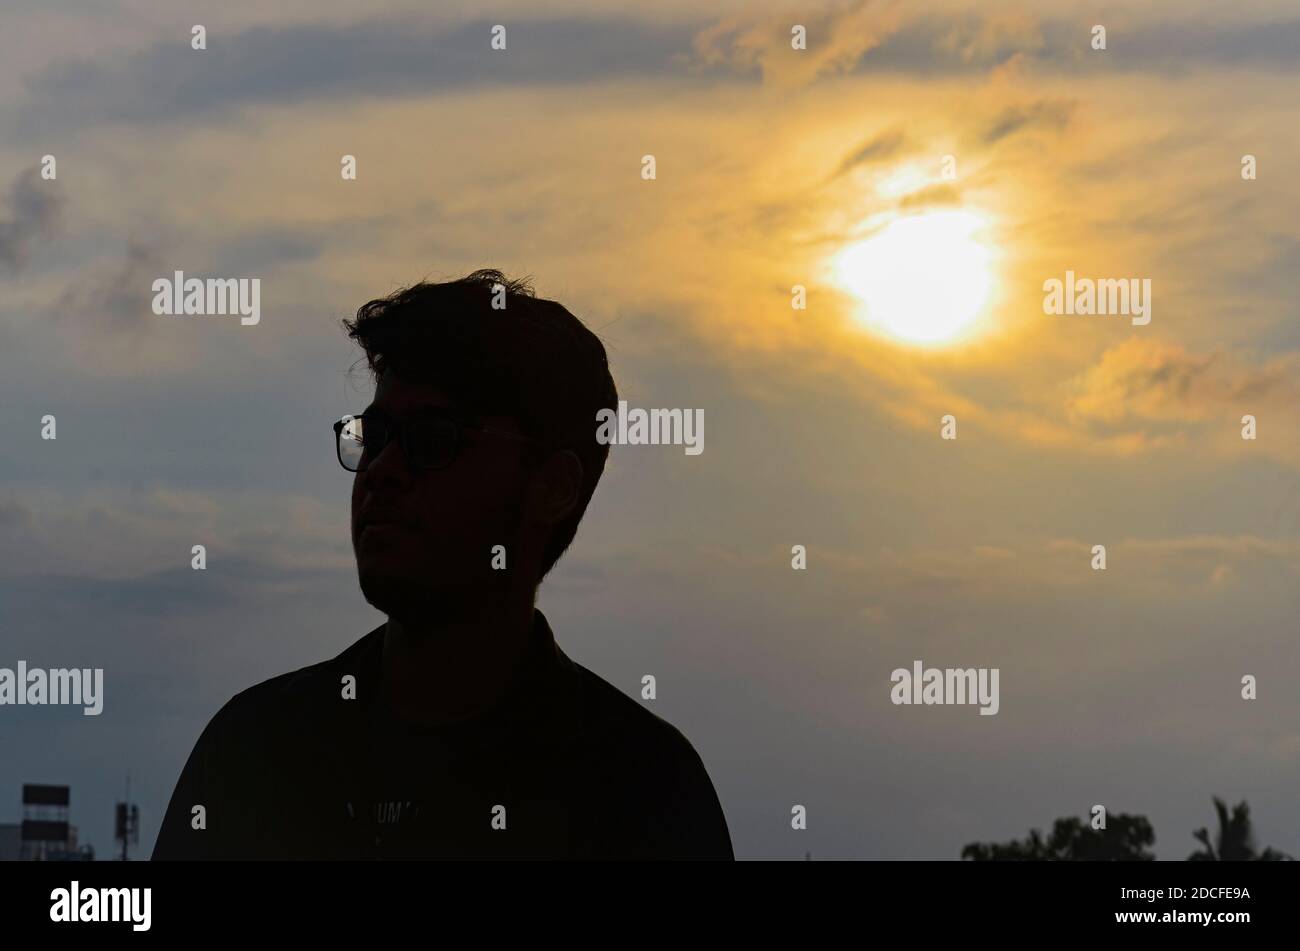 Silhouette of a man standing with sunset on background with cloudy sky. Shot by MNZR. Nikon DSLR. Stock Photo